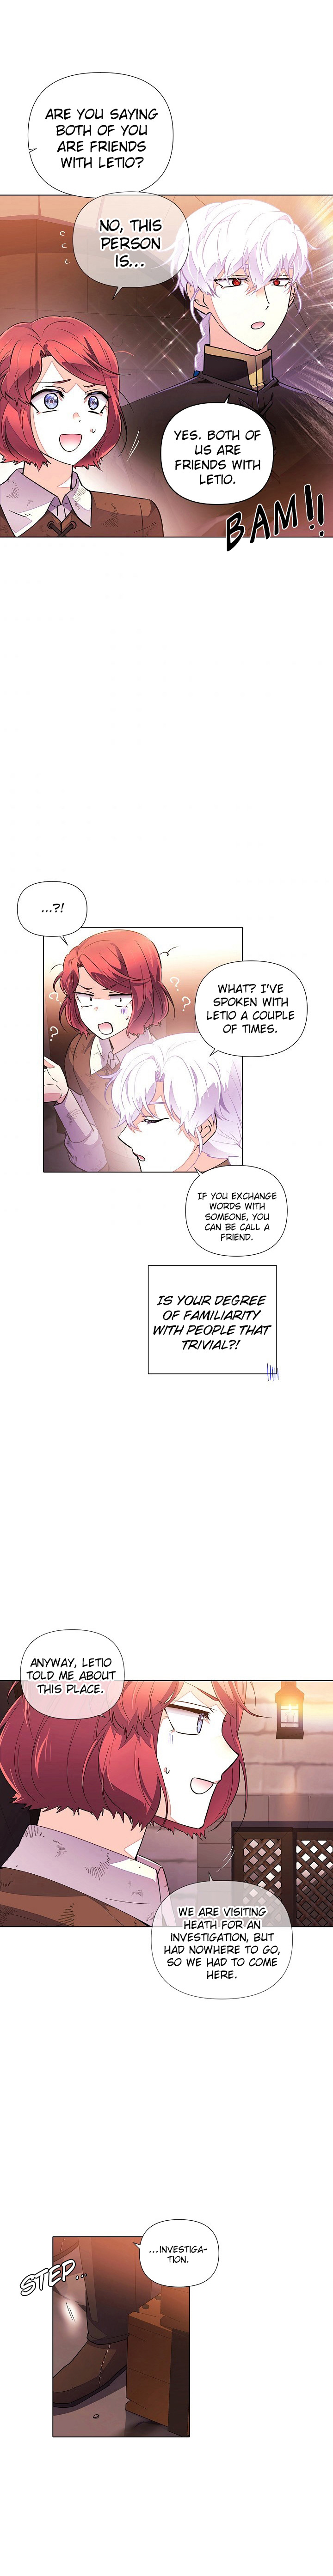 The Villain Discovered My Identity - Chapter 69 Page 2